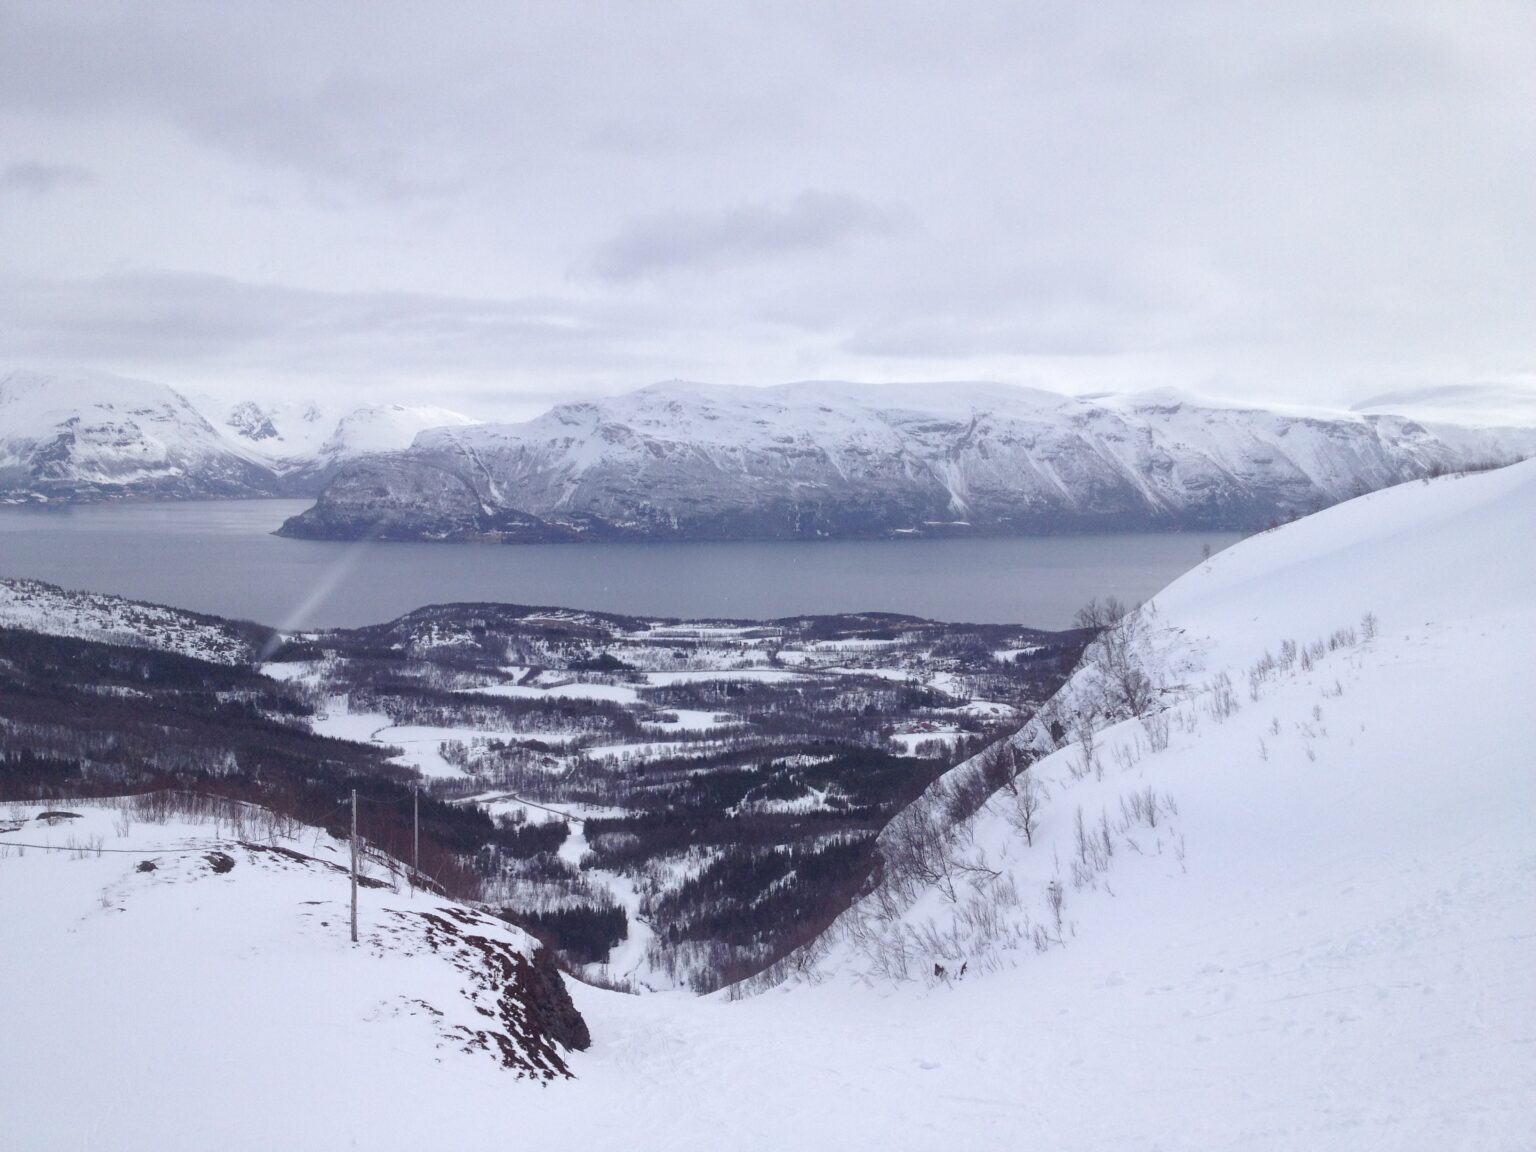 Ski touring up the Lyngen Alps in cloudy conditions